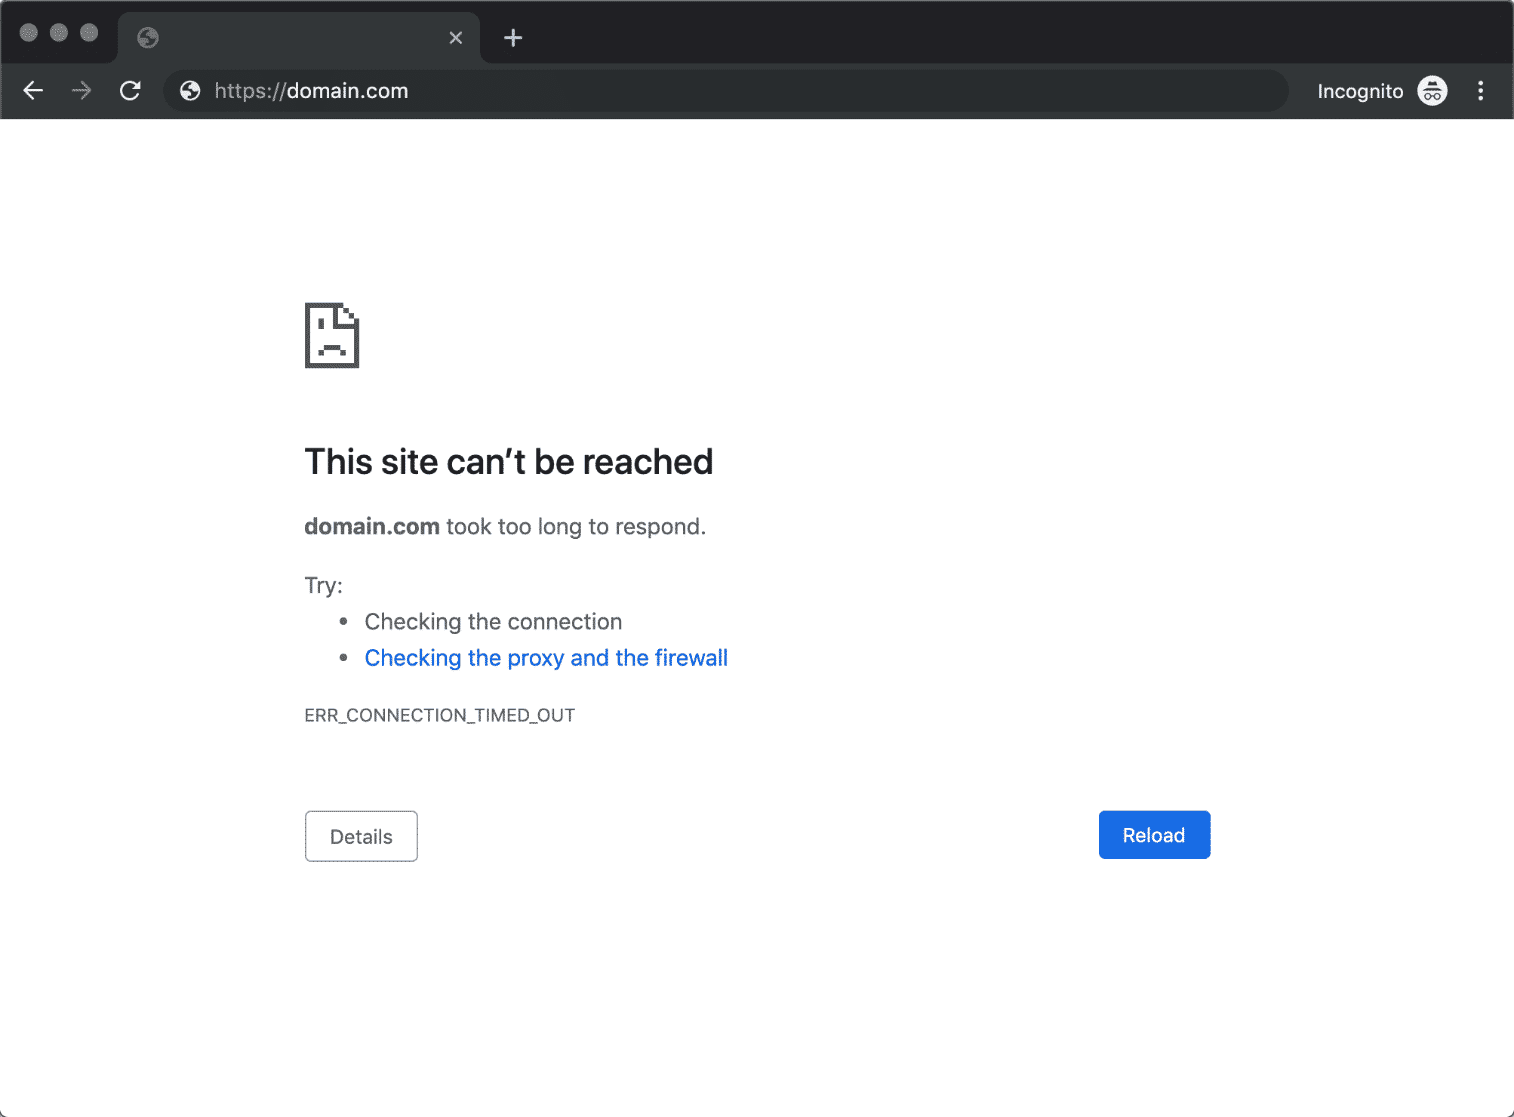 A timeout connection error in Chrome saying 